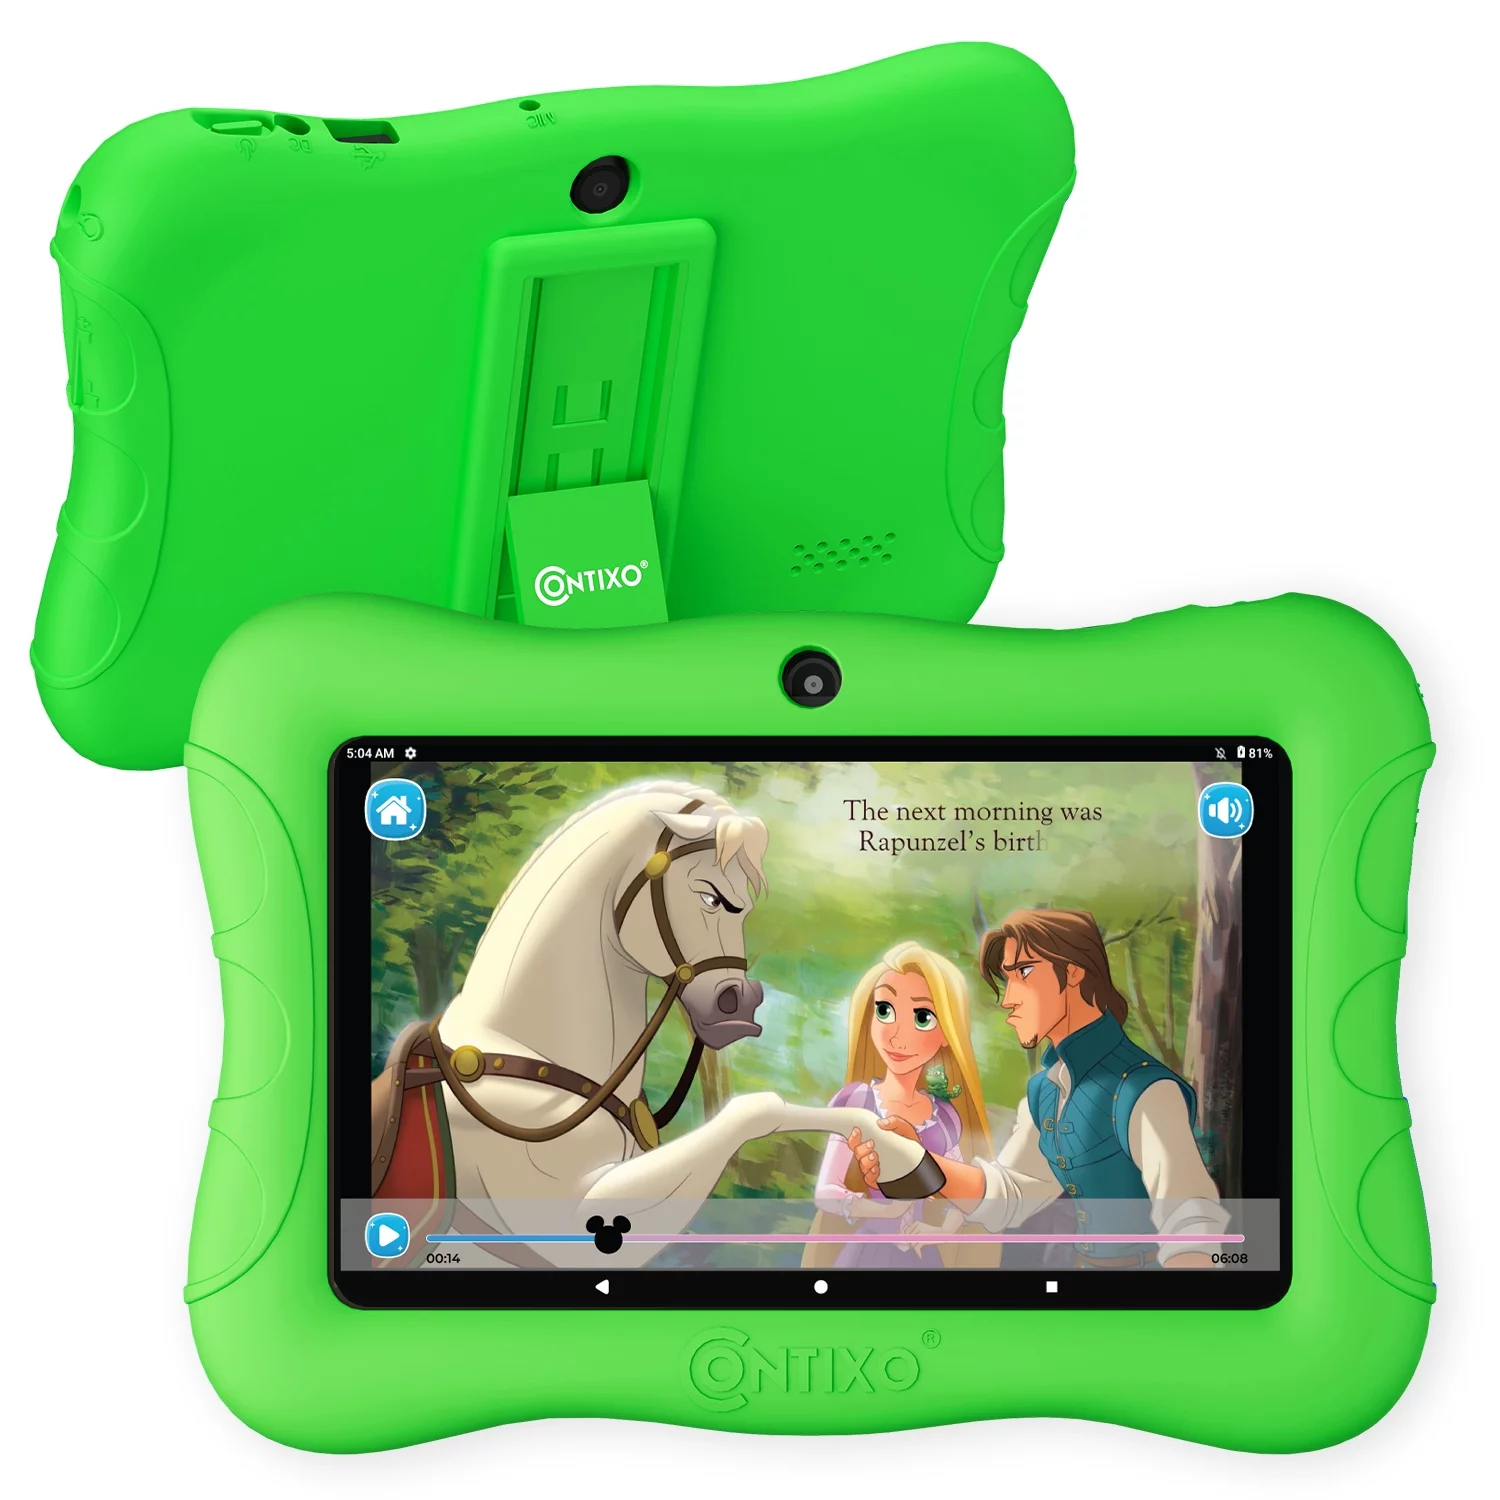 Contixo Kids Tablet with over $150 value of pre-installed Teacher Approved Apps, Android, 7", 32GB Storage, Learning Tablet with Parental Control, Kid-Proof Protective Case, age 3-8, V9-3-32-Green